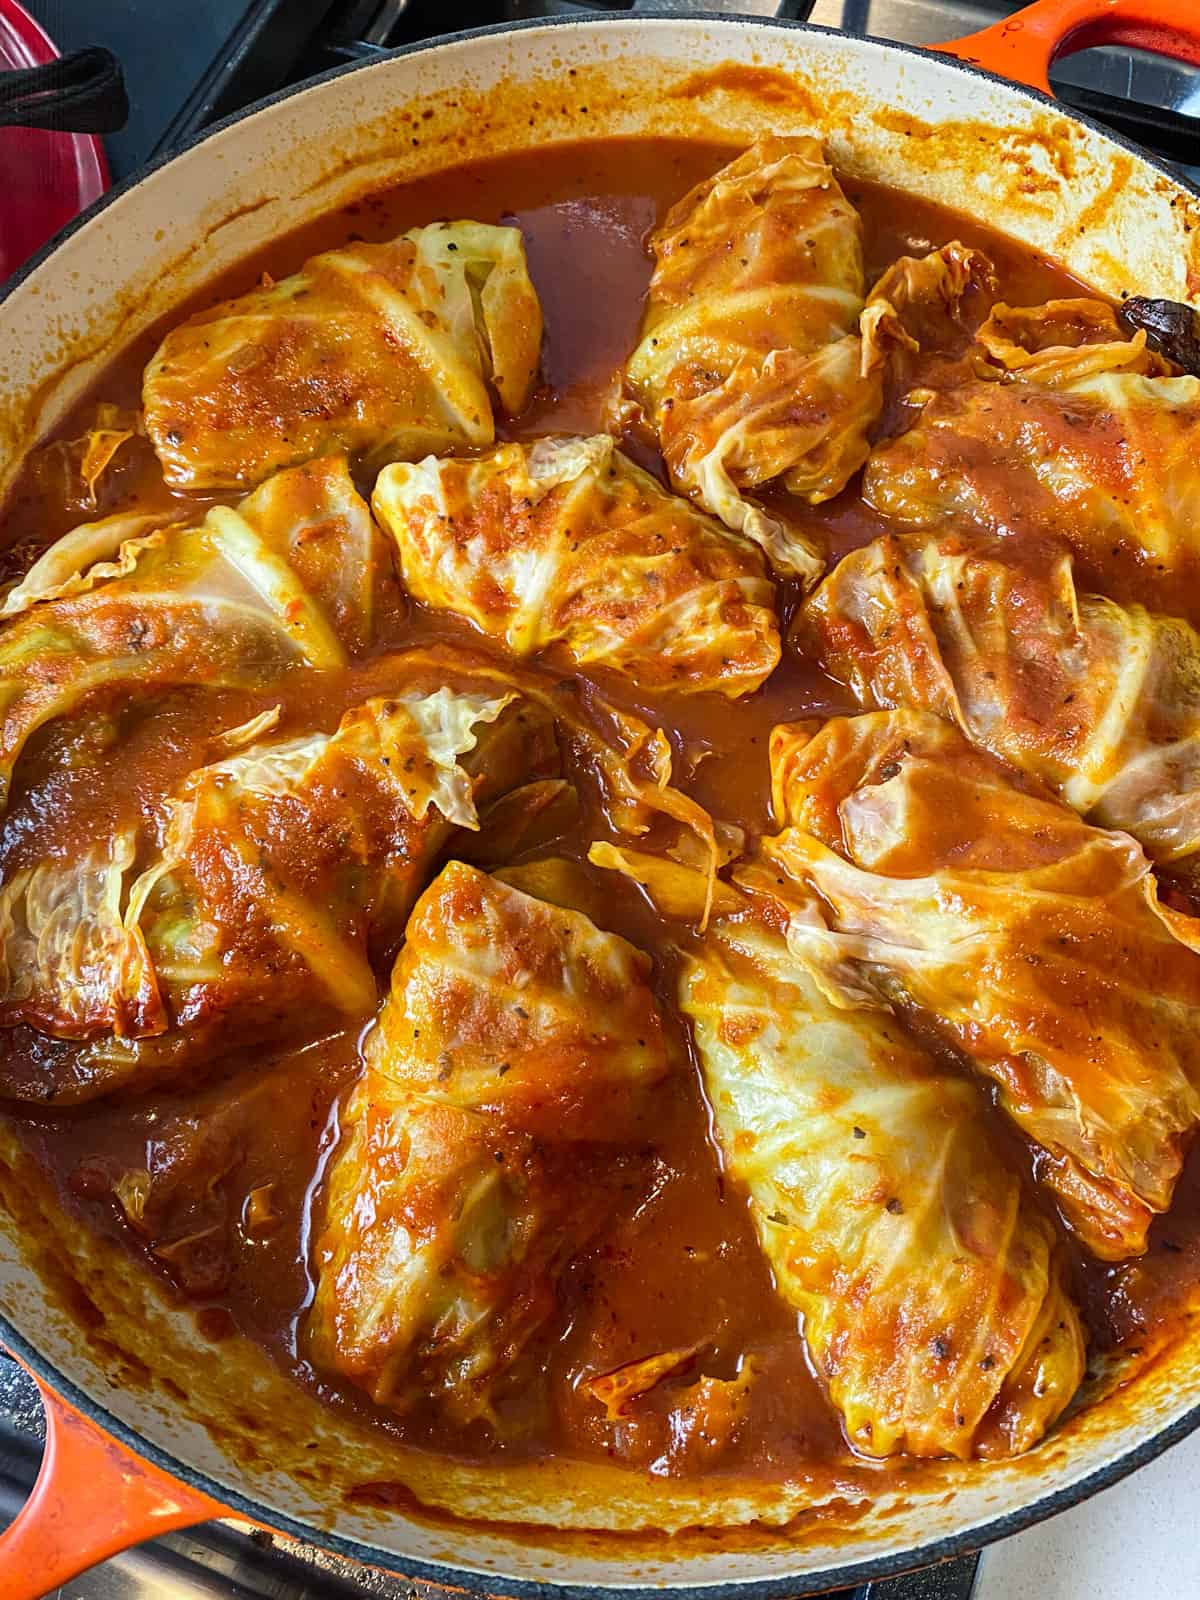 Cooked stuffed cabbage rolls in a sweet and sour tomato sauce.